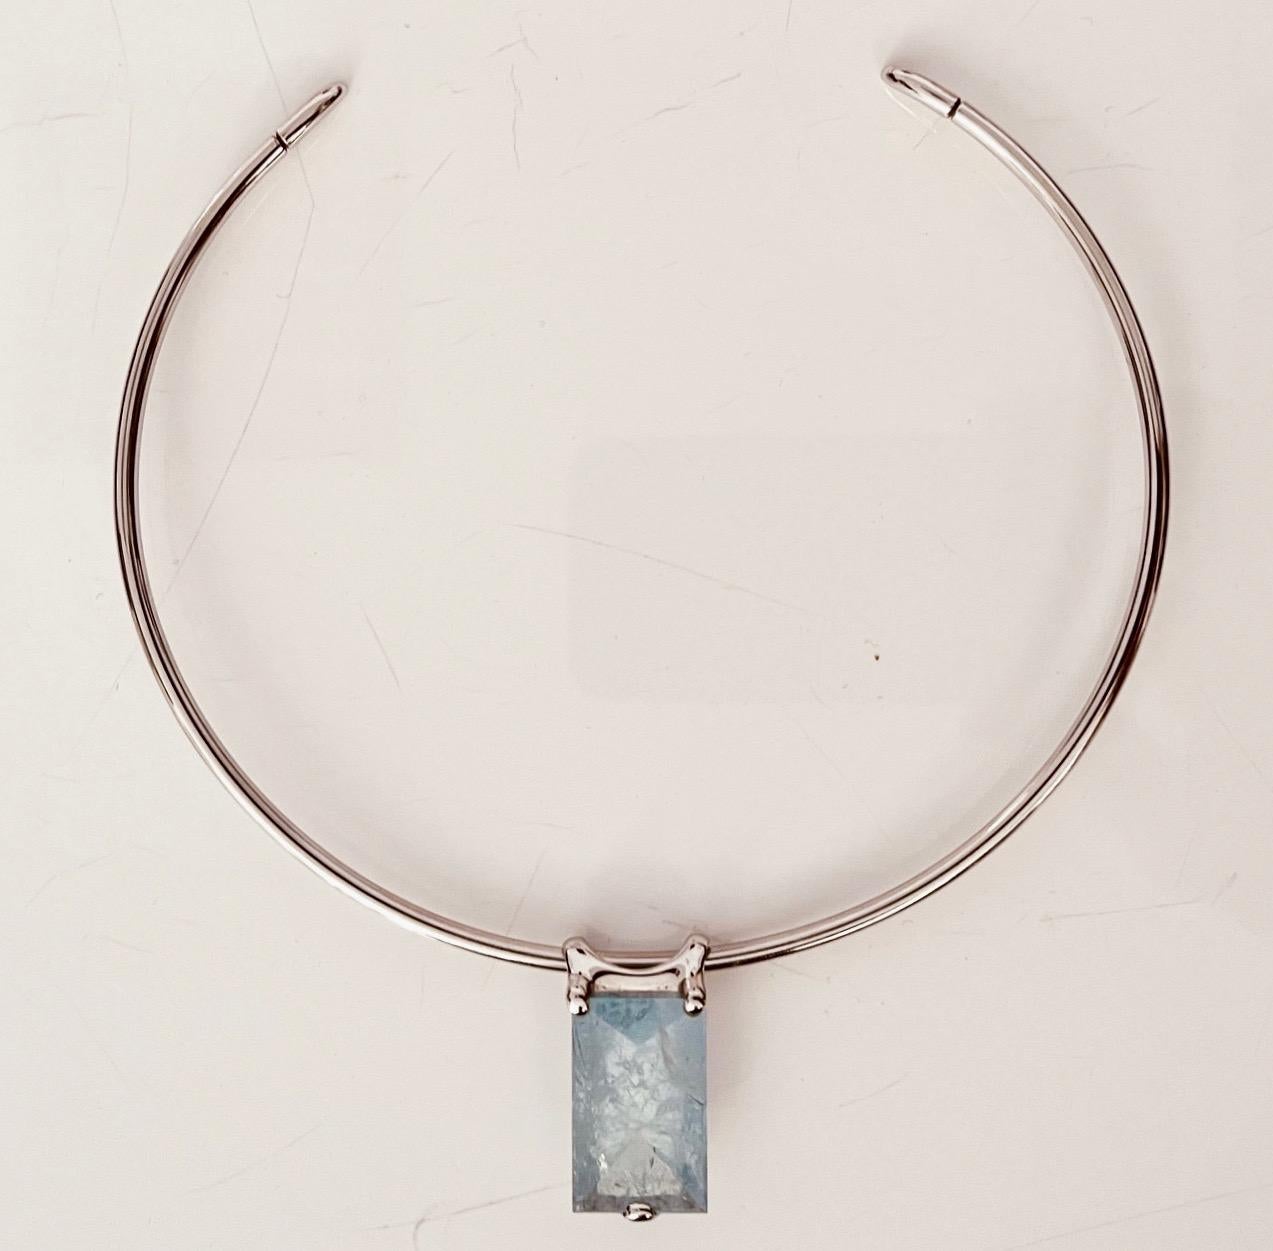 18 carat white gold choker with rectangular Aquamarine removable pendant. 12cm choker diameter, 6.8cm opening.    This necklace falls under two categories: choker and pendant necklaces. The Aquamarine pendant measuring 25x11x9mm. Hallmarks: signed